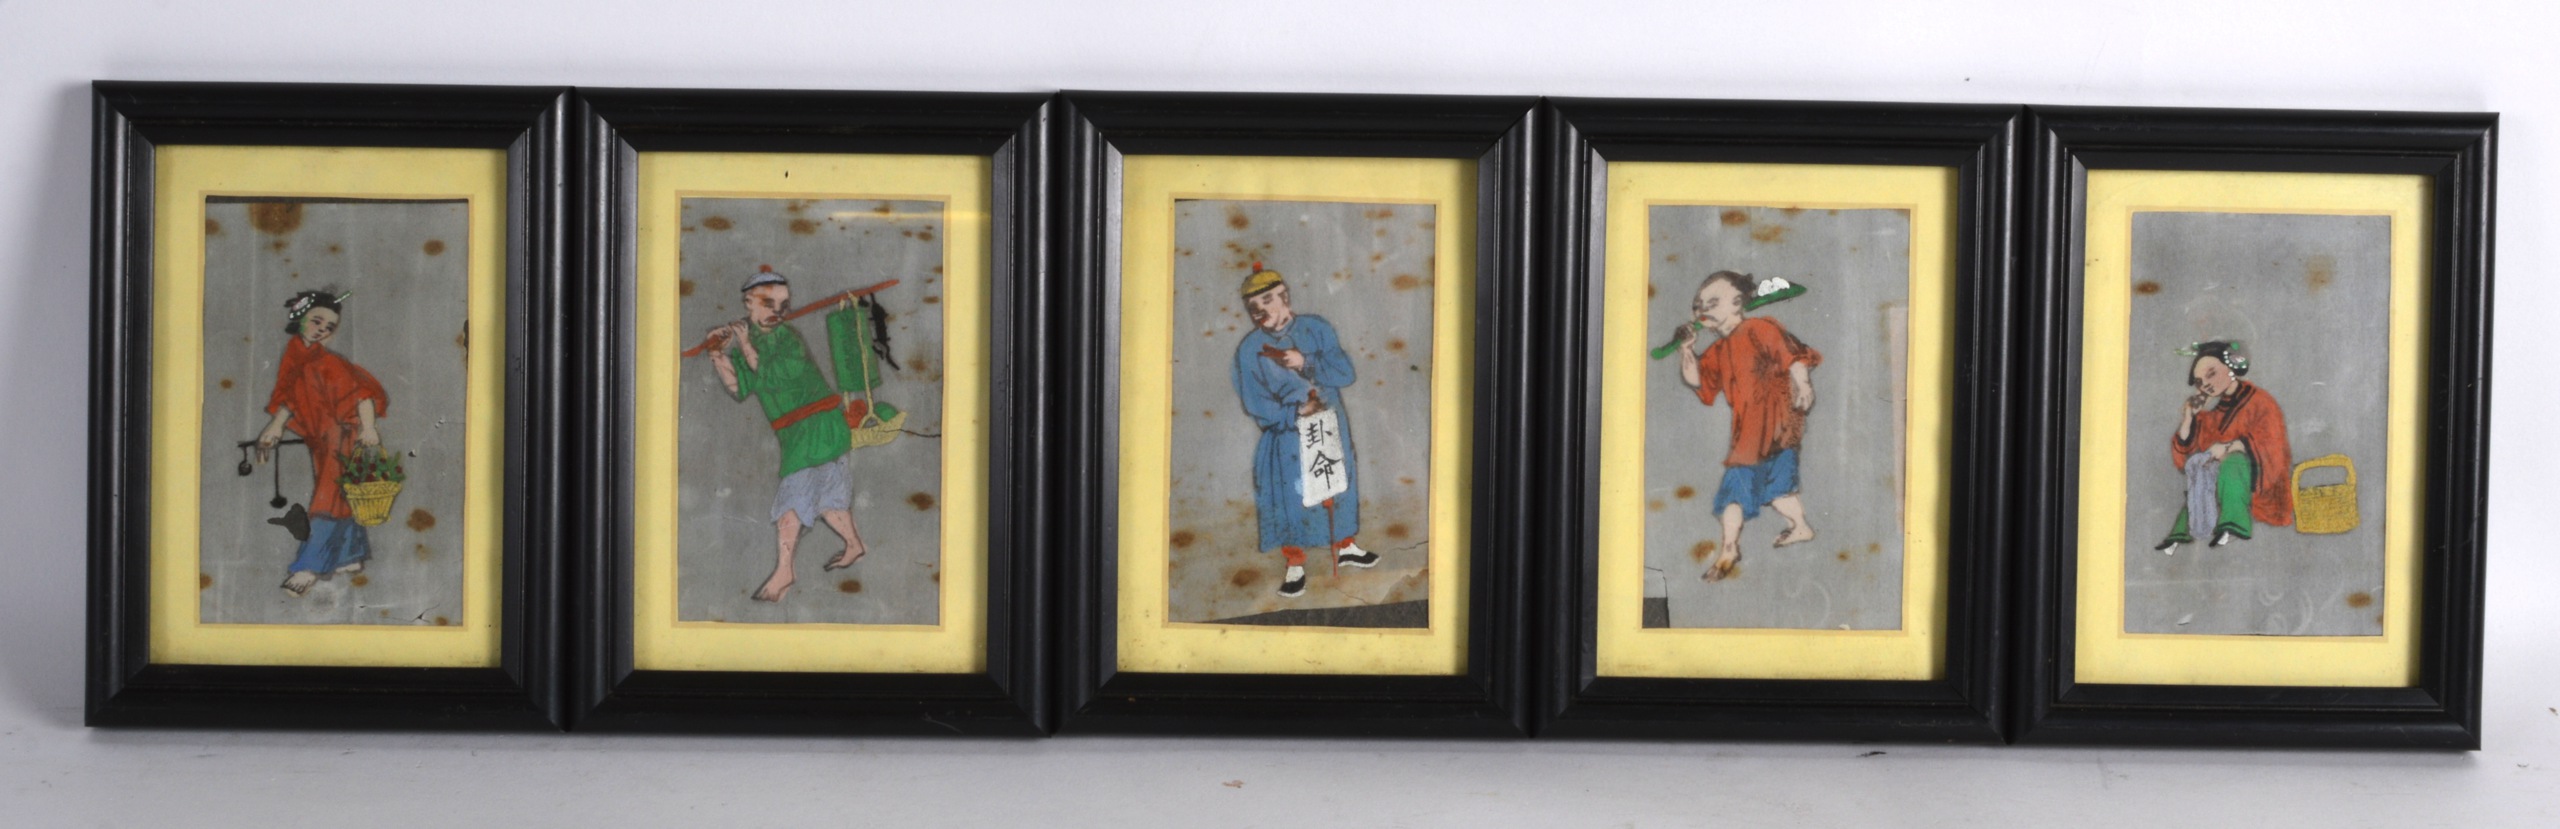 A SET OF FIVE 19TH CENTURY CHINESE FRAMED RICE PAPER PAINTINGS contained within ebonised frames.